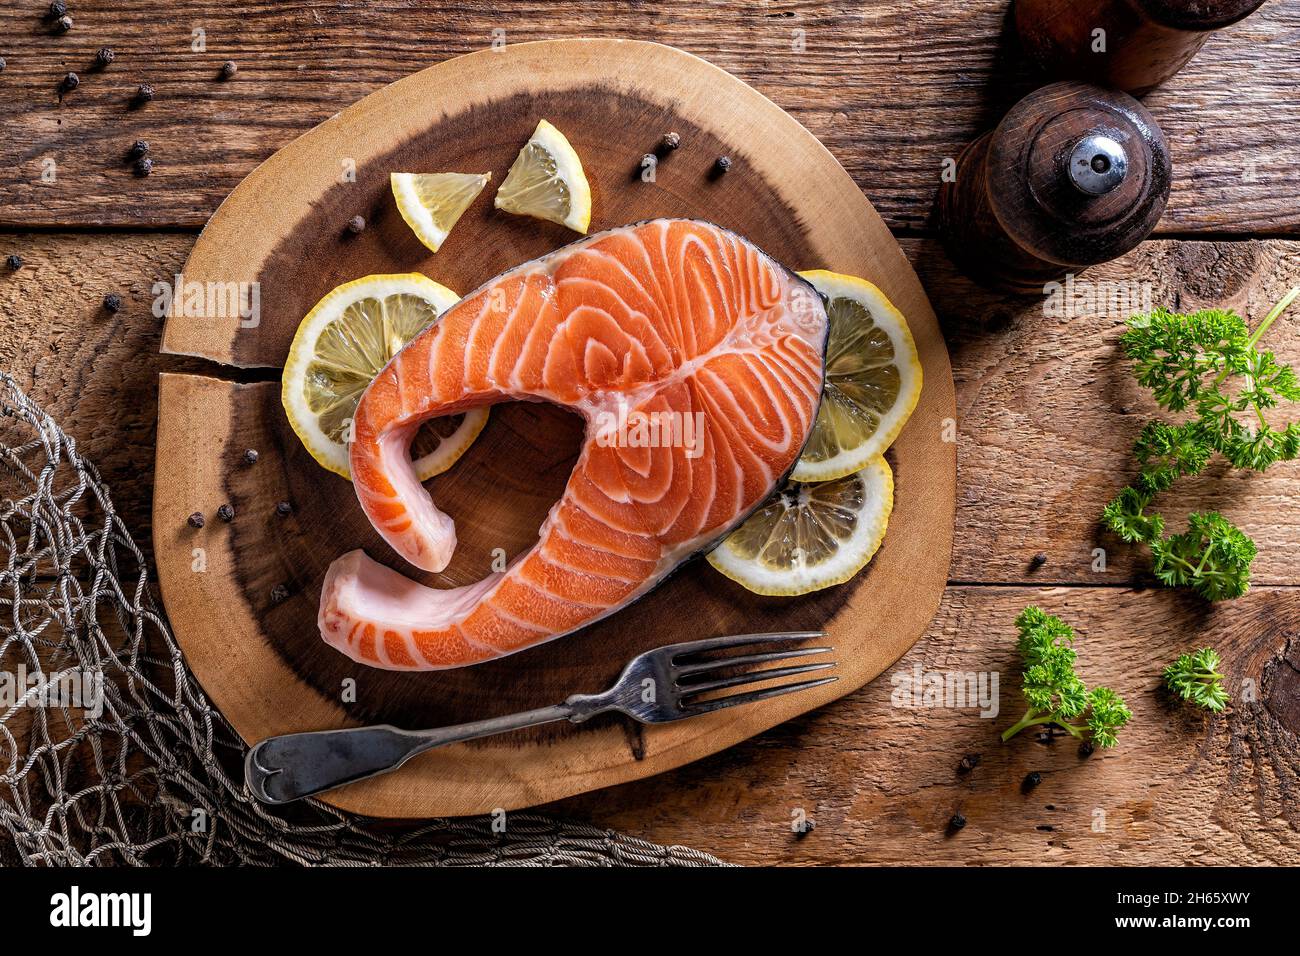 An Atlantic Salmon steak on a rustic wood table top with lemon, peppercorn and parsley. Stock Photo